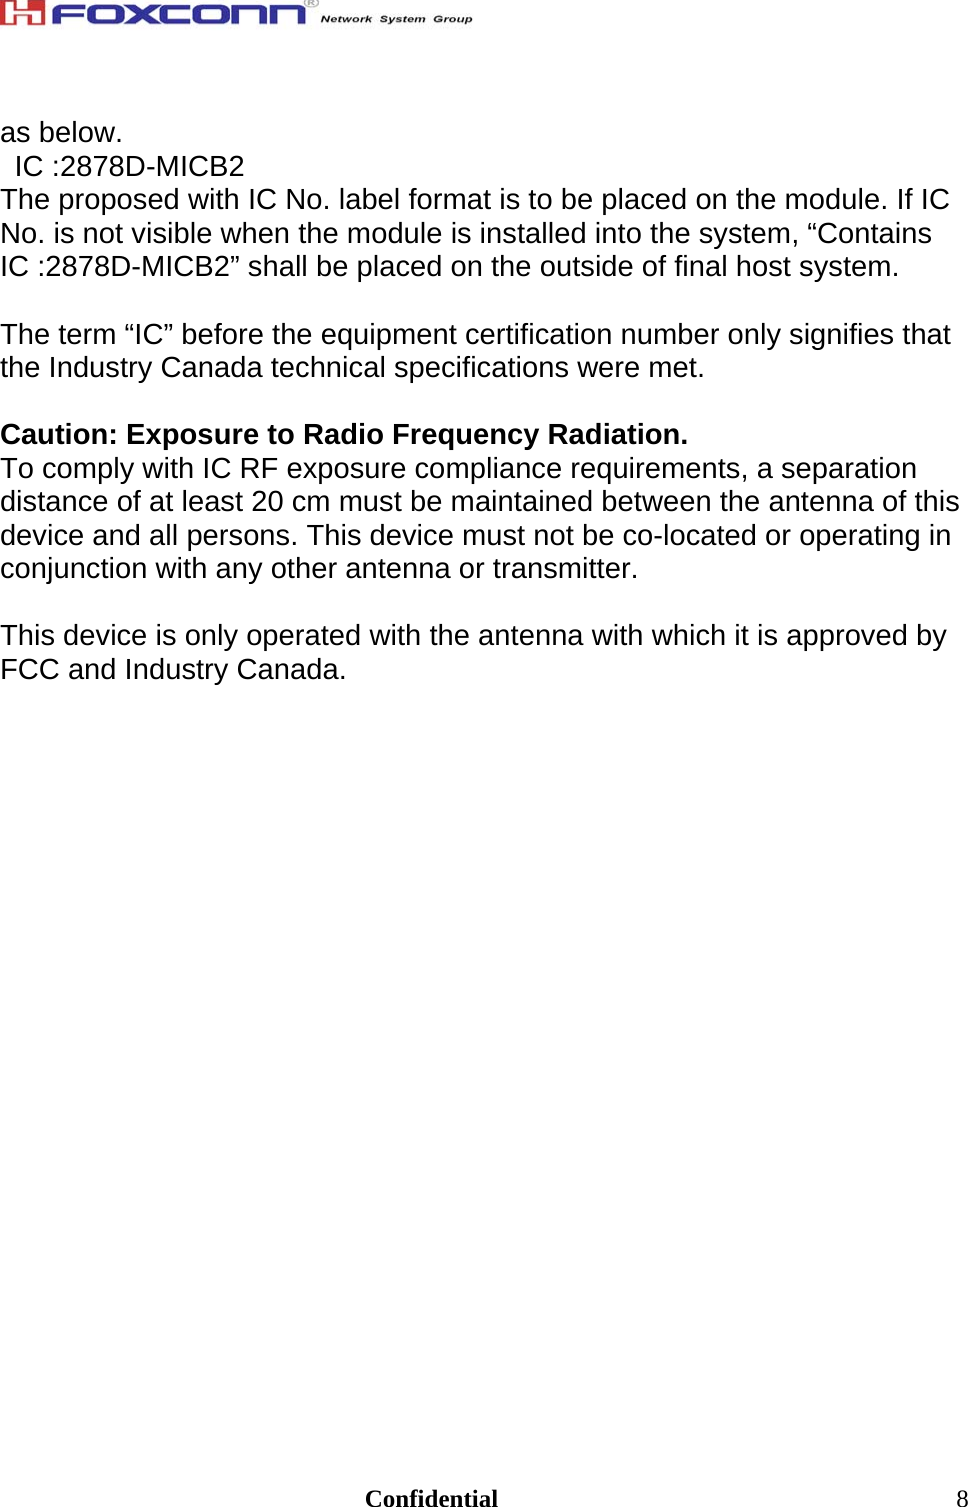                                                                               Confidential  8as below. IC :2878D-MICB2 The proposed with IC No. label format is to be placed on the module. If IC No. is not visible when the module is installed into the system, “Contains IC :2878D-MICB2” shall be placed on the outside of final host system.   The term “IC” before the equipment certification number only signifies that the Industry Canada technical specifications were met.  Caution: Exposure to Radio Frequency Radiation. To comply with IC RF exposure compliance requirements, a separation distance of at least 20 cm must be maintained between the antenna of this device and all persons. This device must not be co-located or operating in conjunction with any other antenna or transmitter.  This device is only operated with the antenna with which it is approved by FCC and Industry Canada.     